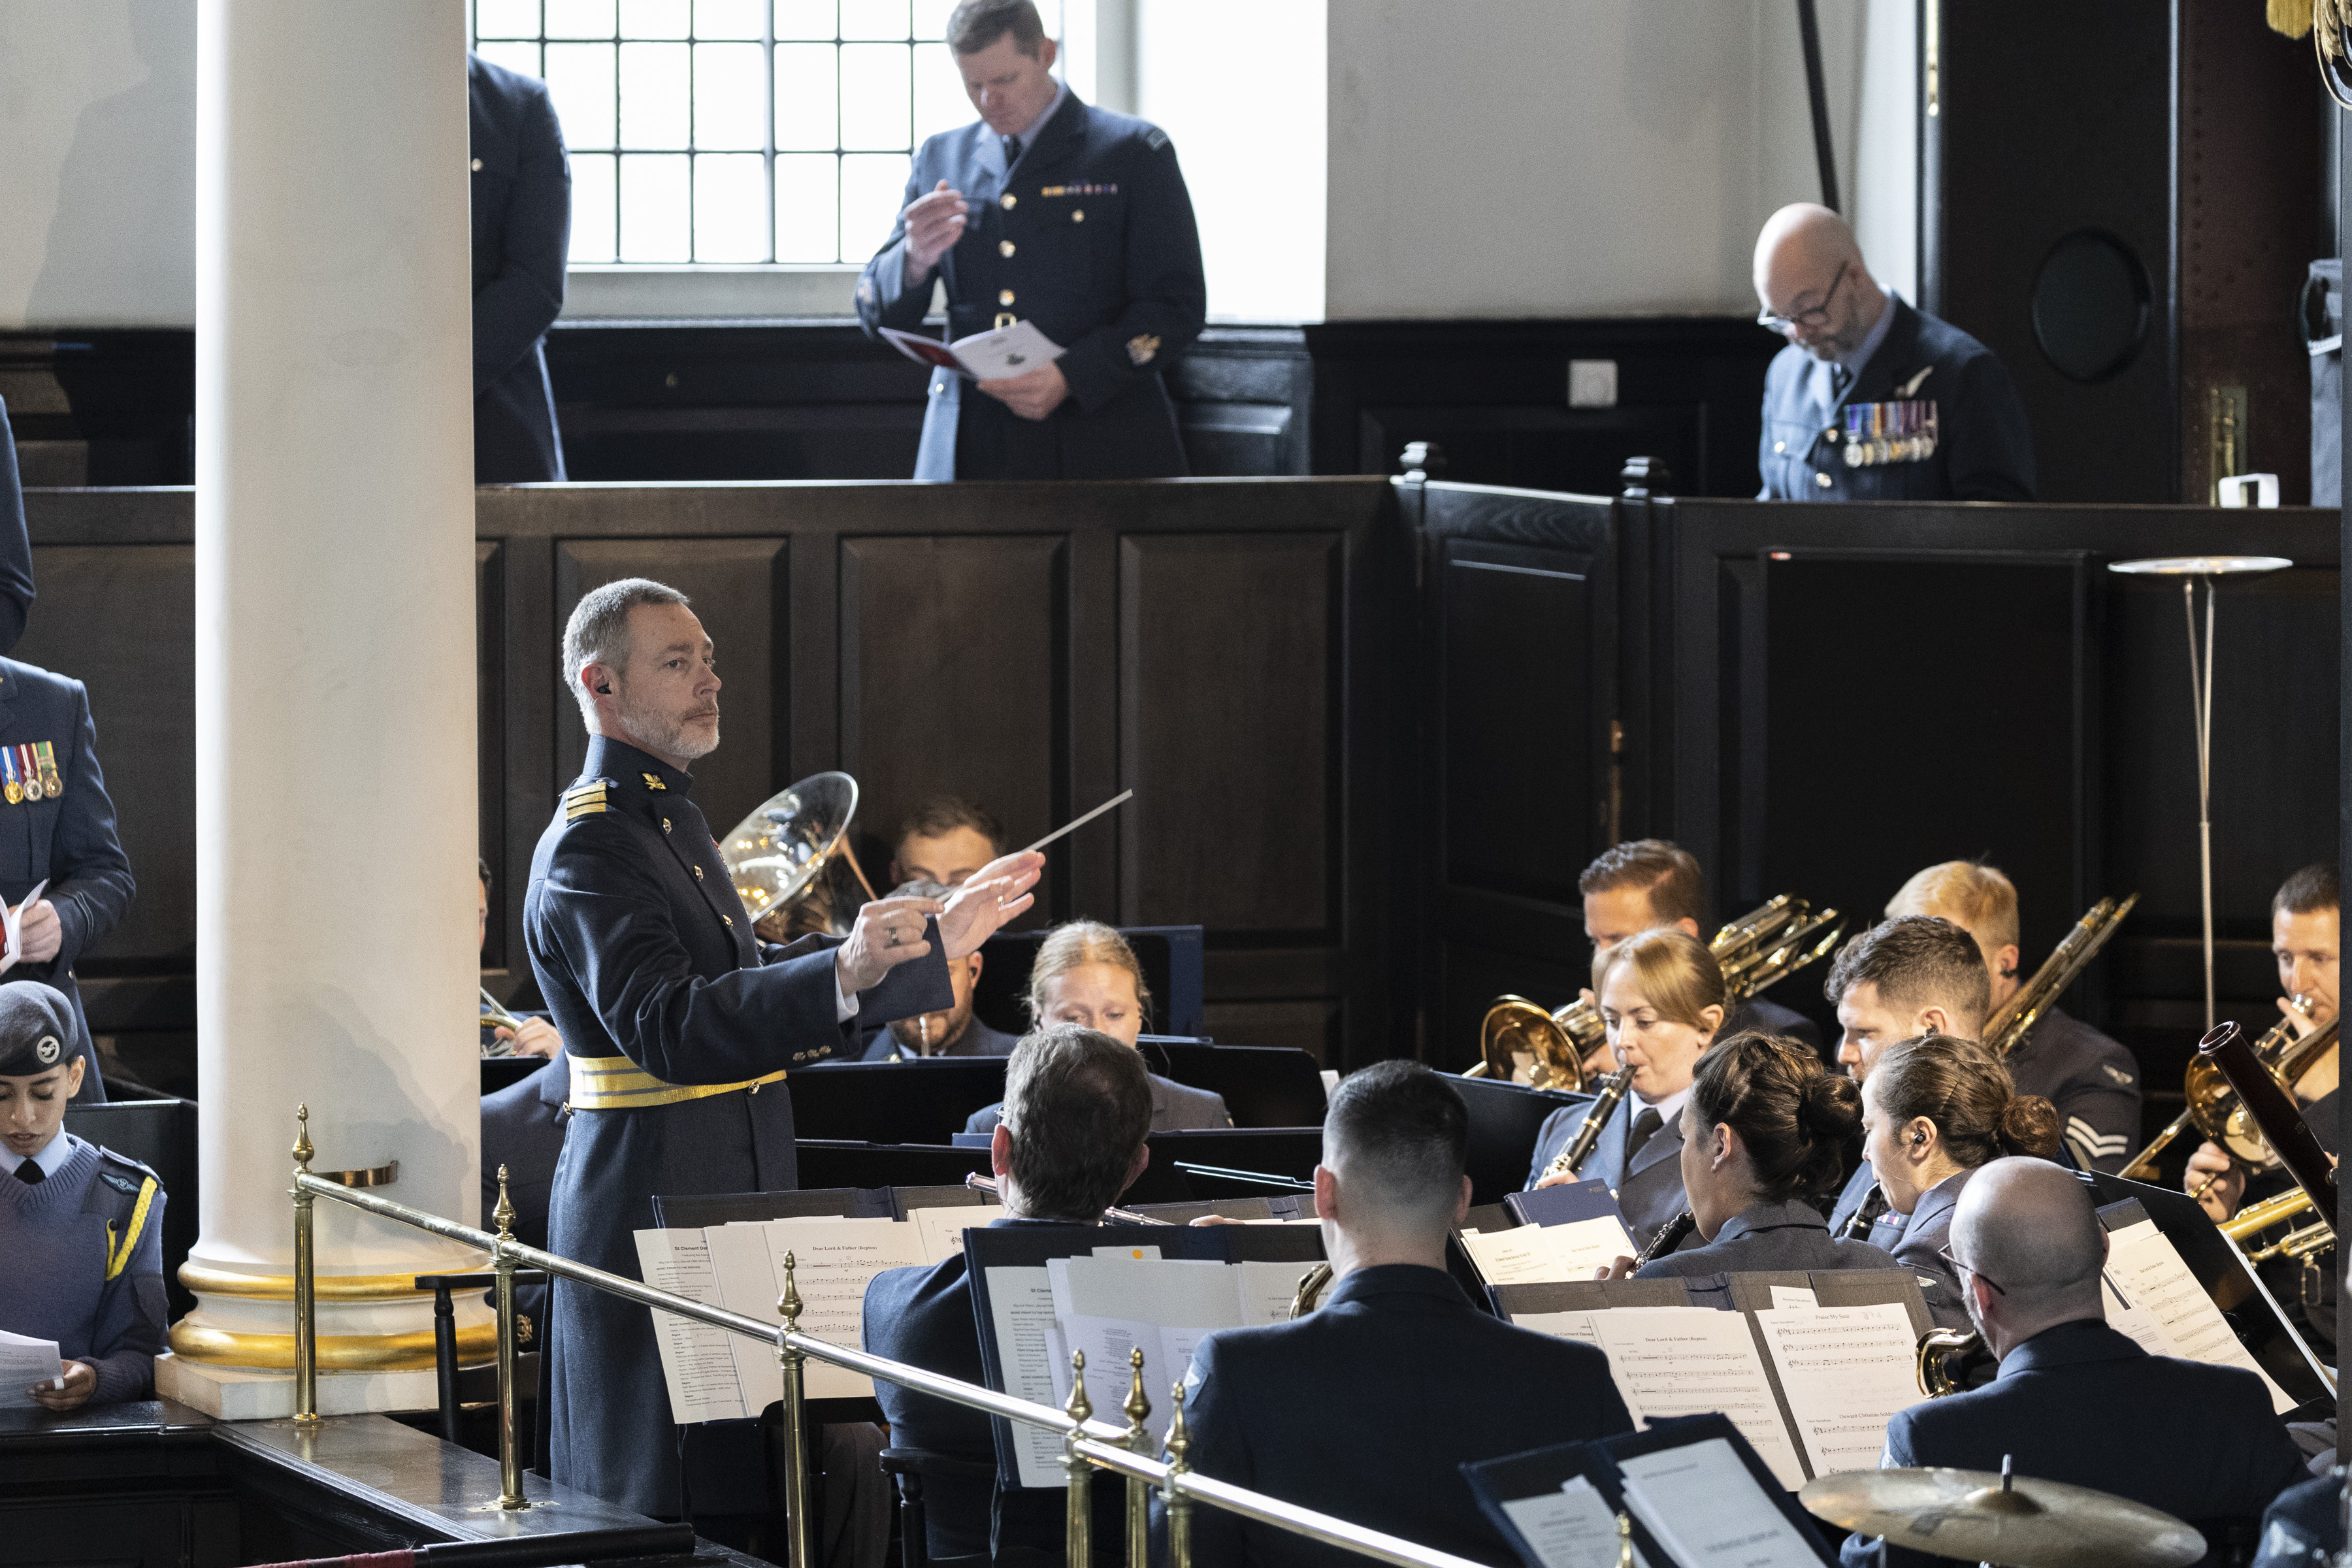 Image shows the RAF Music Services performing.